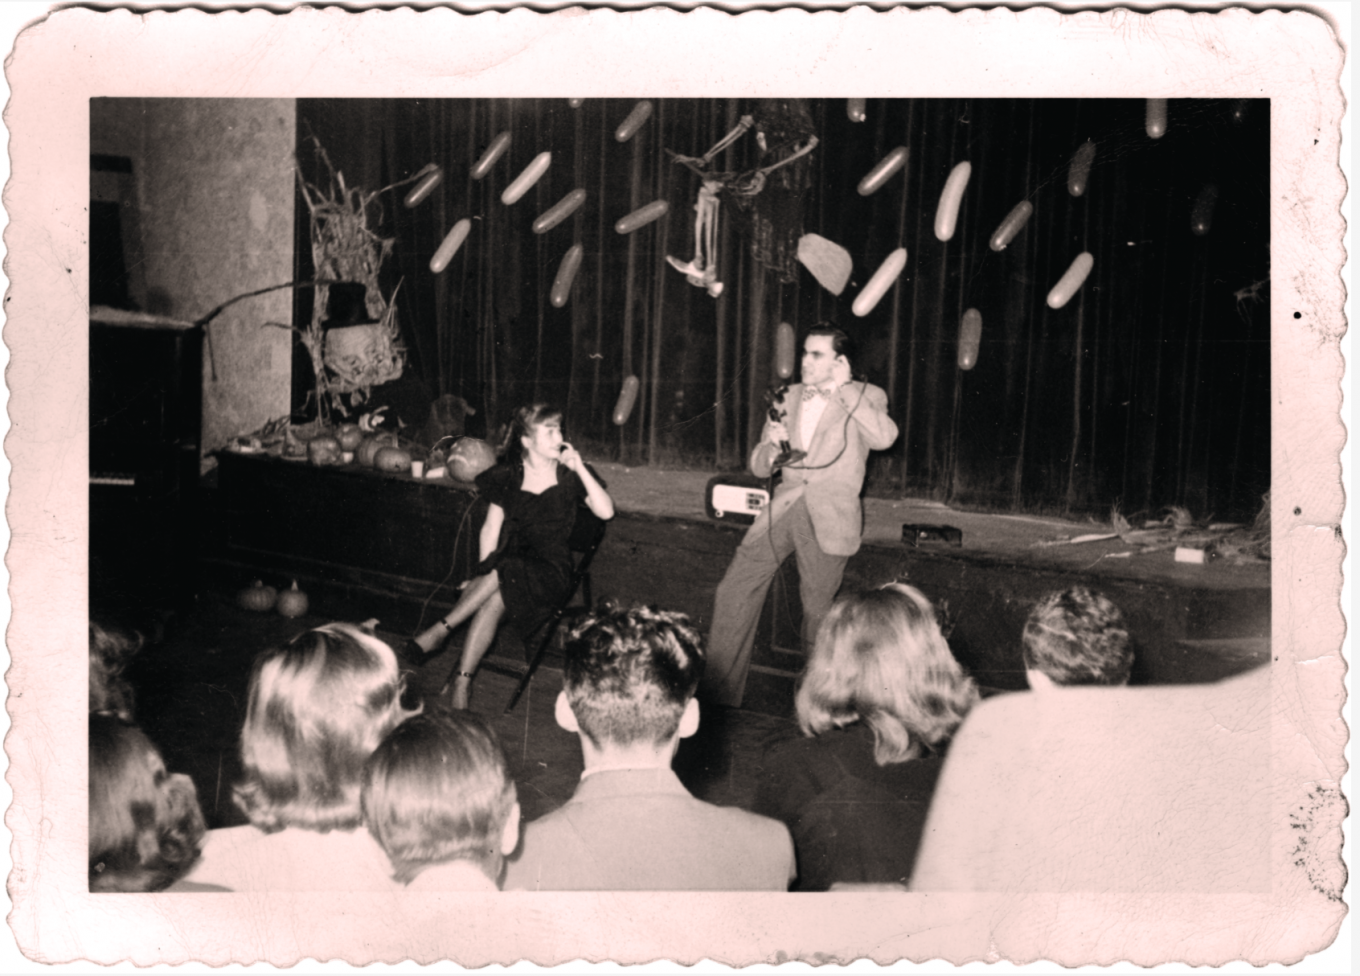 Bill Dana '50 on stage performing during a Halloween event